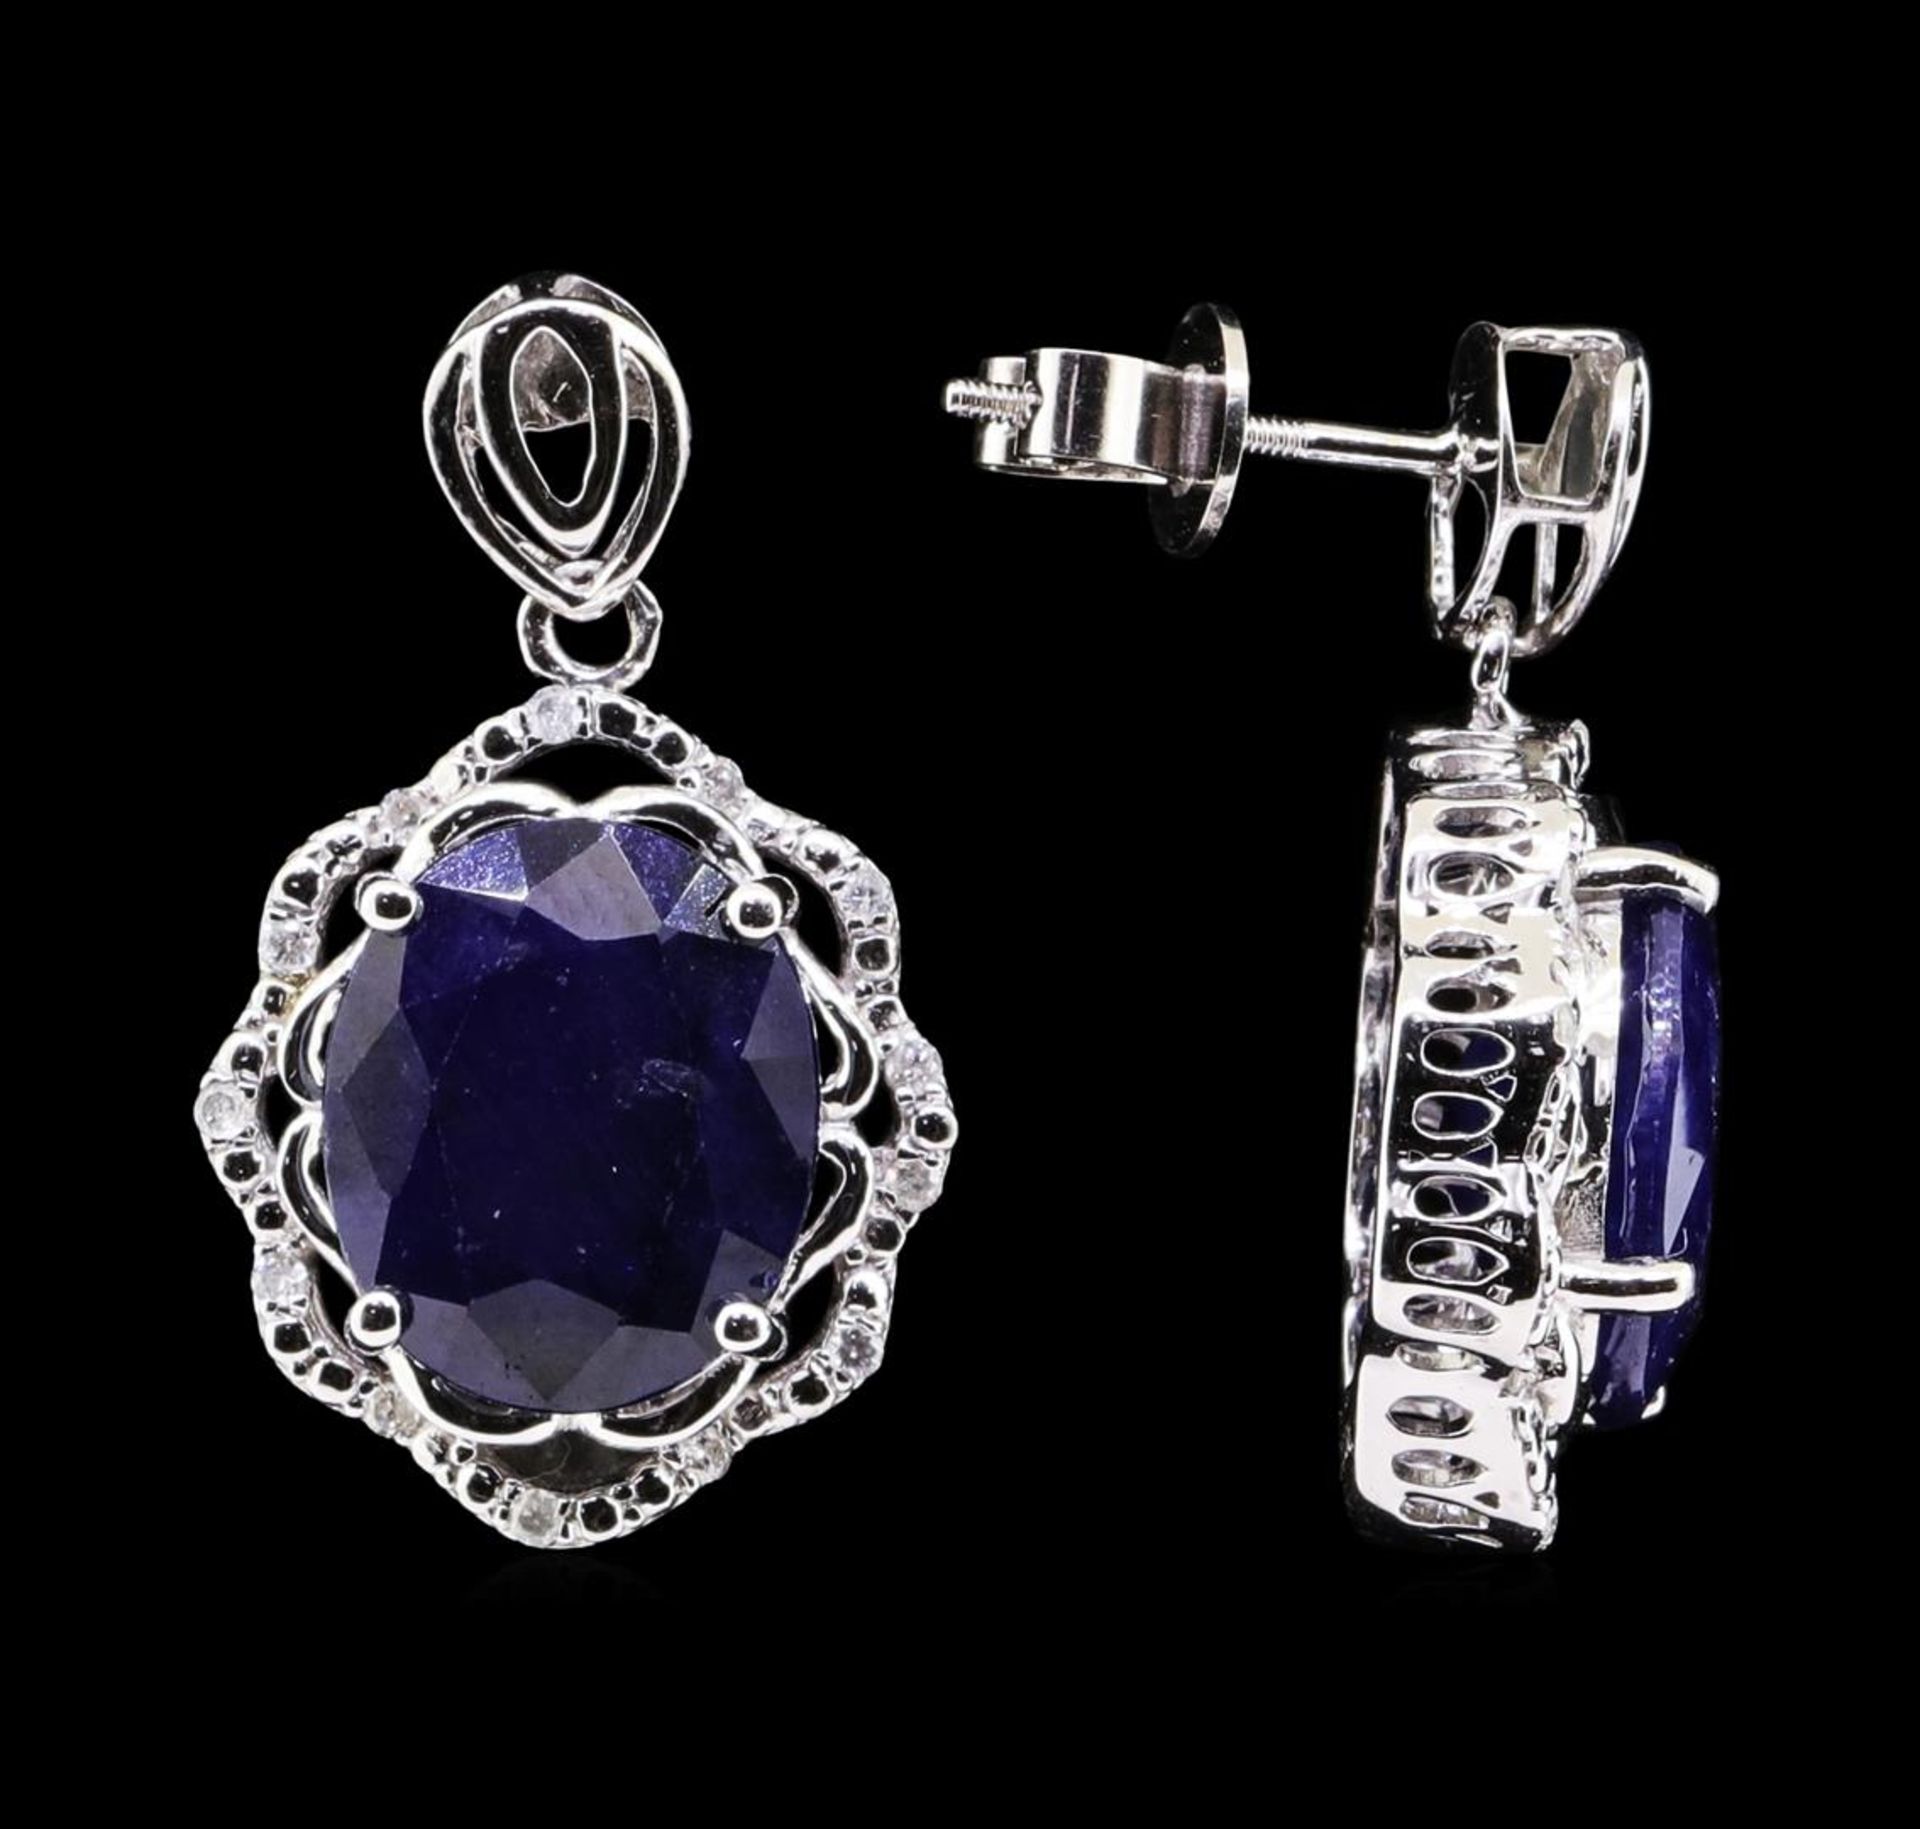 14.2 ctw Sapphire and Diamond Earrings - 14KT White Gold - Image 2 of 3